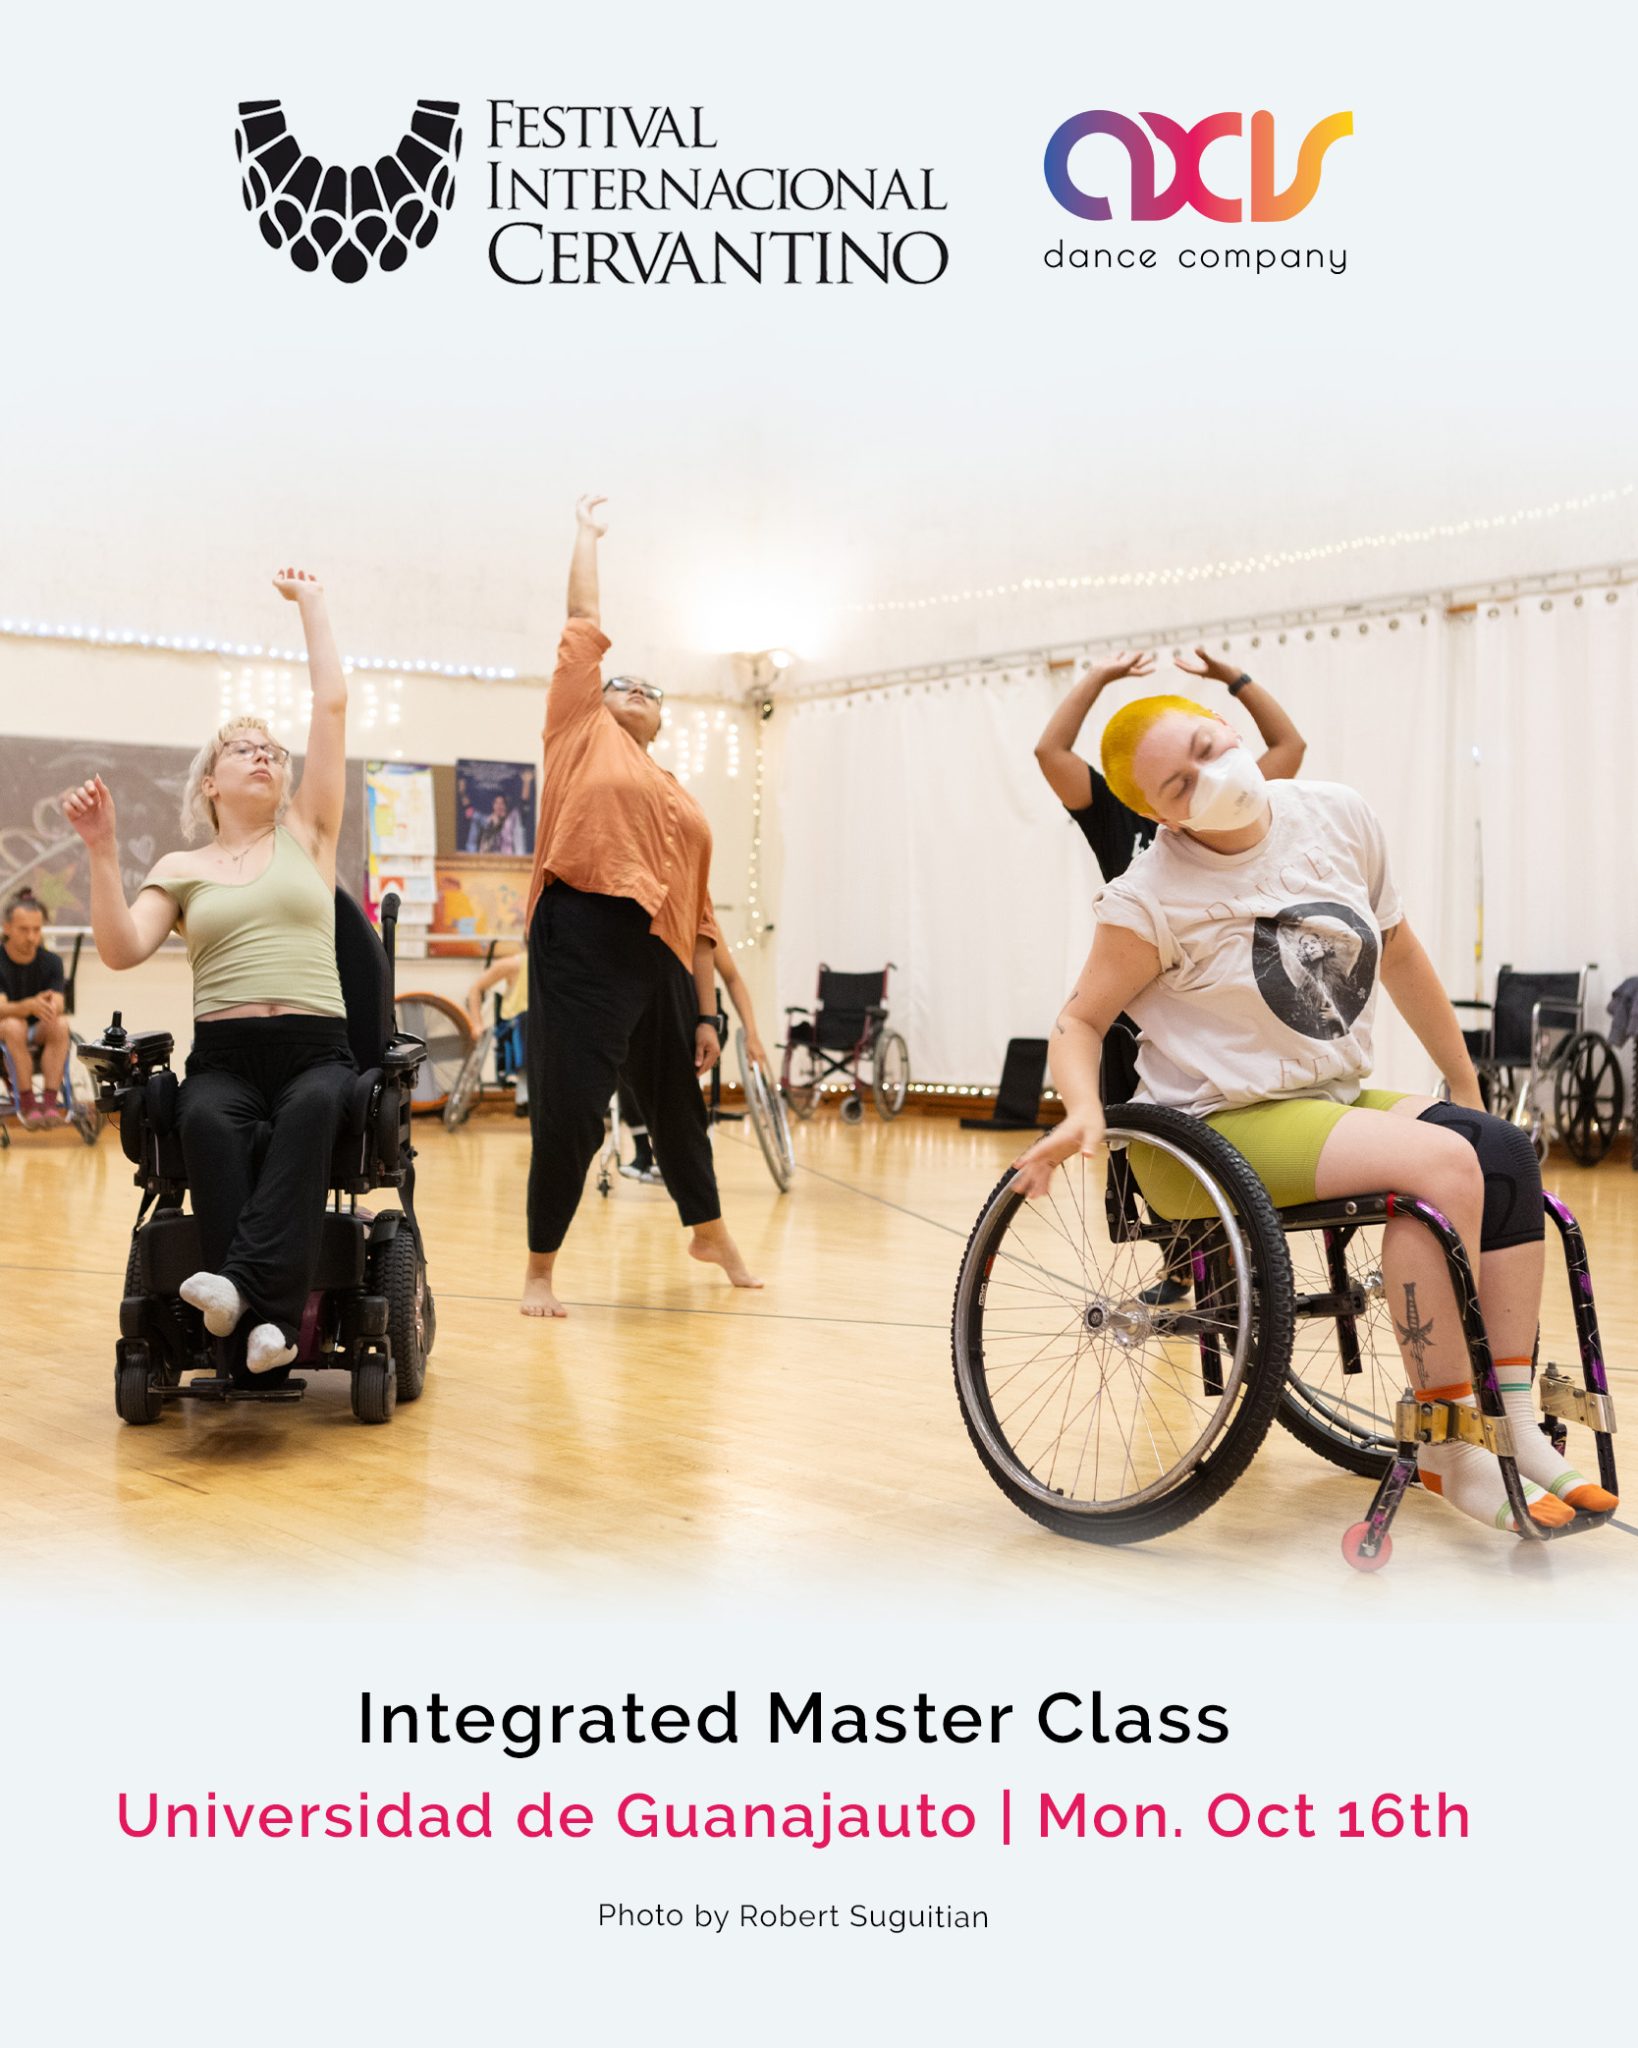 A photo of a group of students, standing and in wheelchairs, raising one limb up during an AXIS dance class. Cervantino and AXIS logos are placed with text reading information included in the event description.